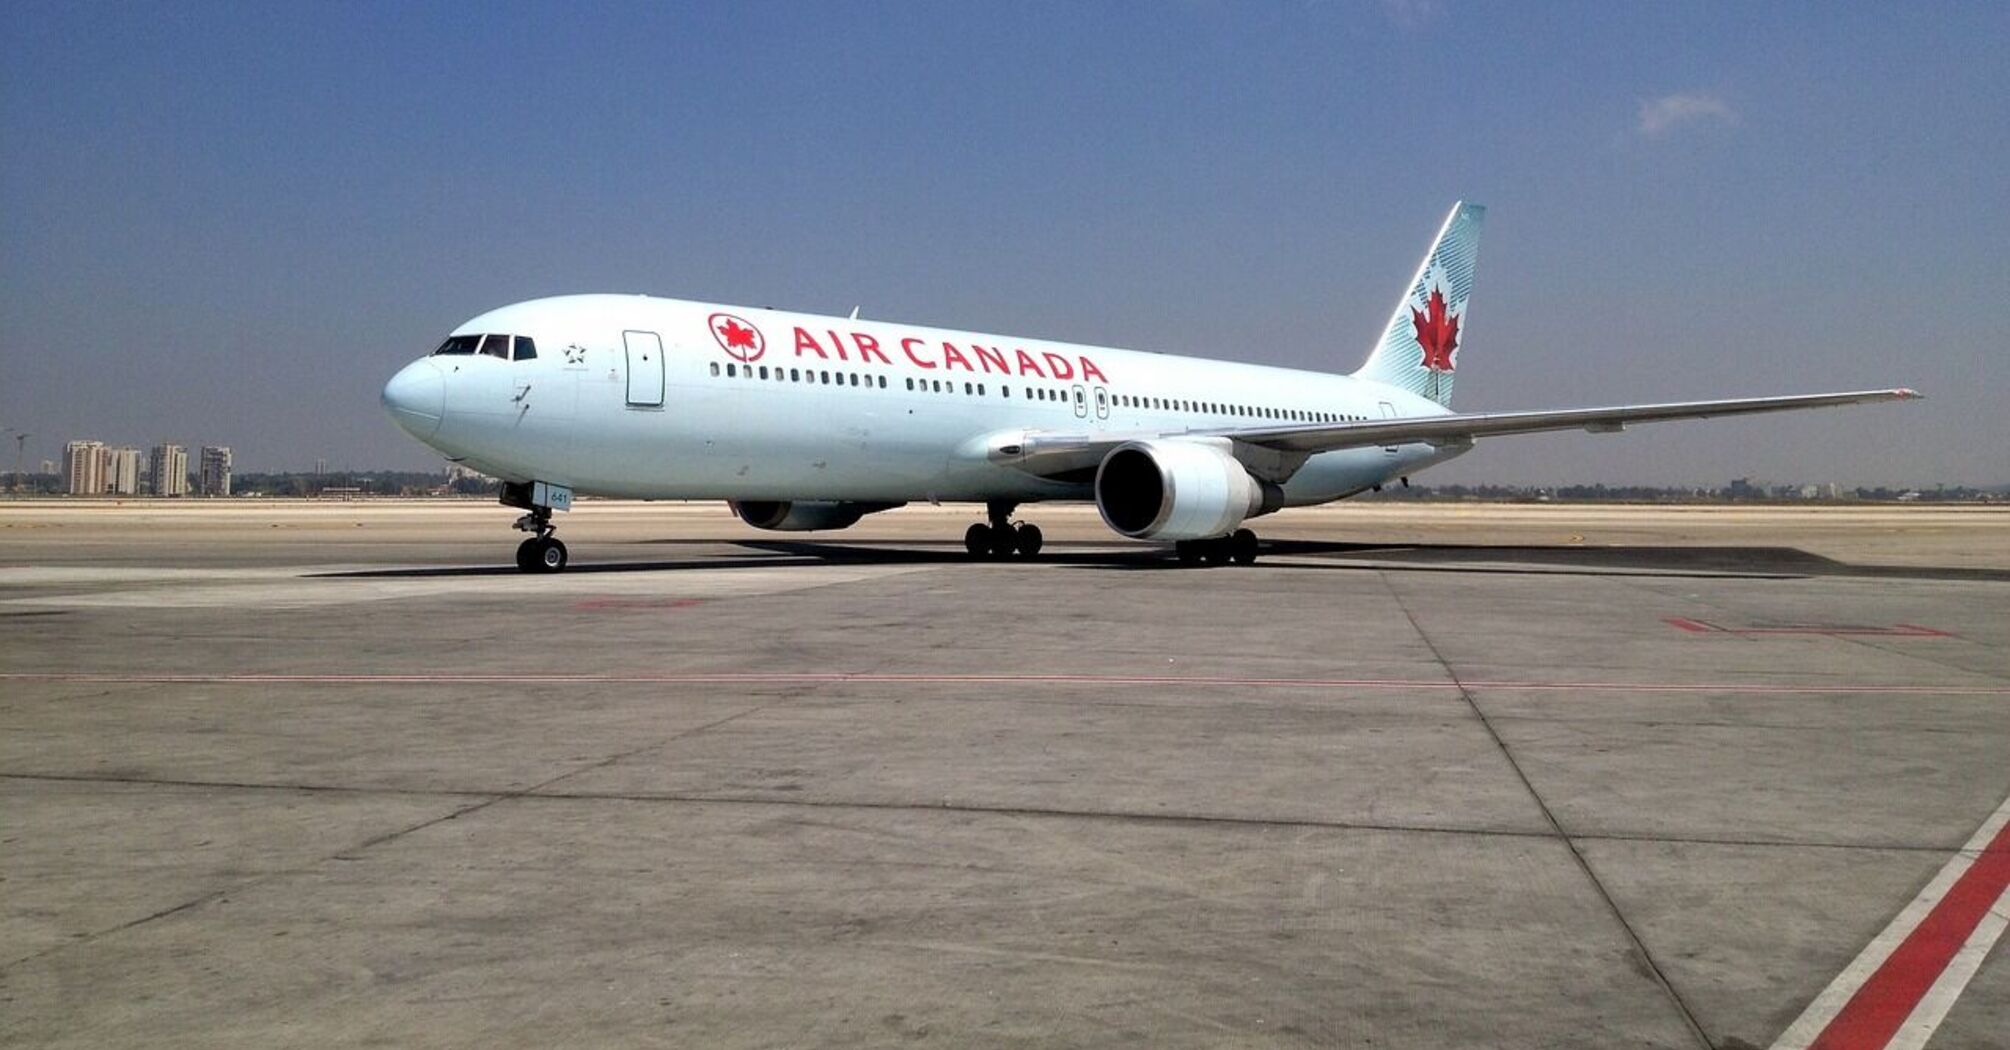 Air Canada plane makes an emergency landing due to depressurization in the cabin